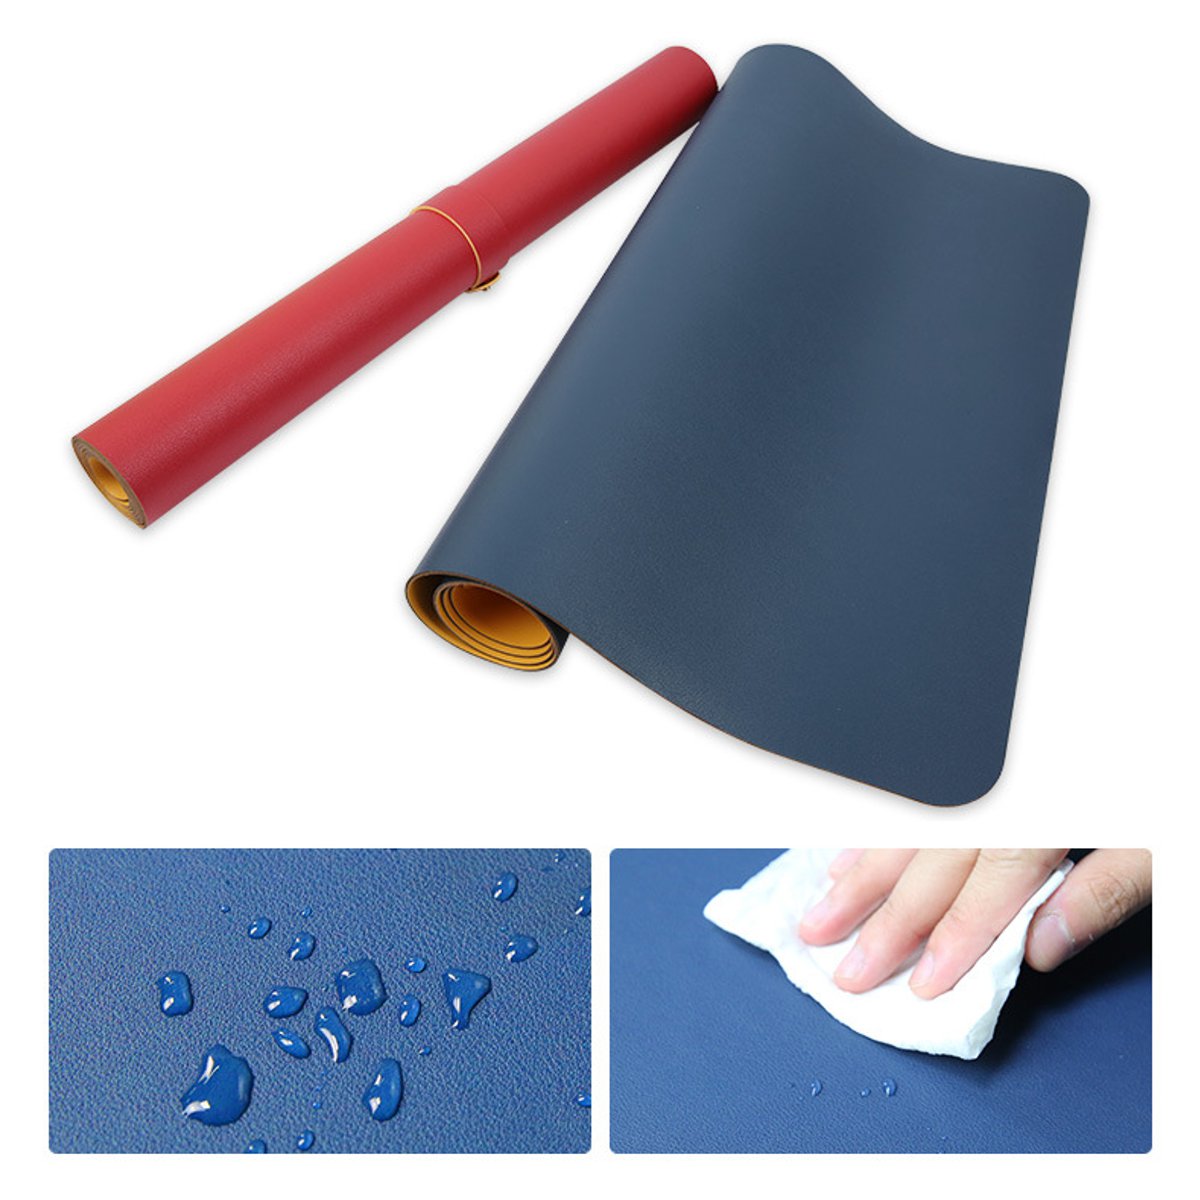 80x40cm Both Sides Two Colors Extended PU leather Mouse Pad Mat Large Office Gaming Desk Mat 8